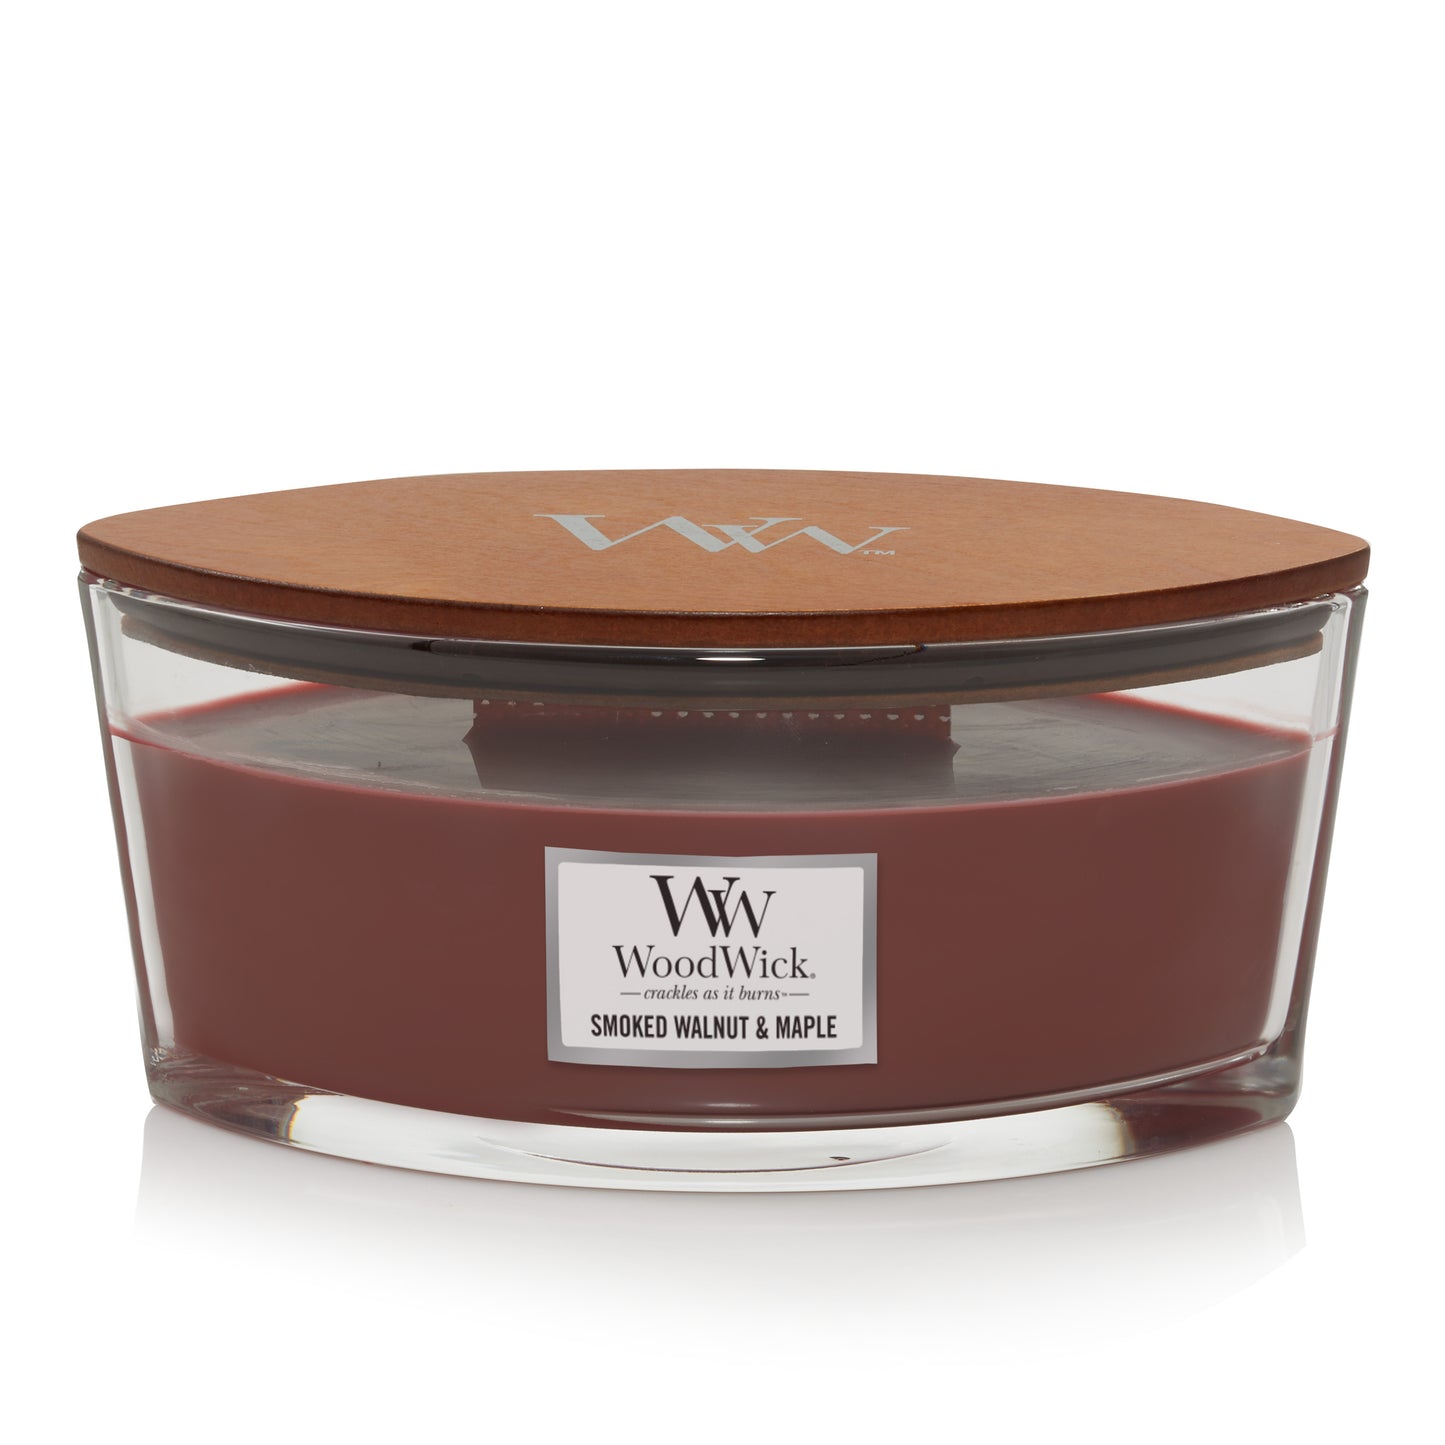 SMOKED WALNUT HearthWick Flame Large Scented Candle by WoodWick